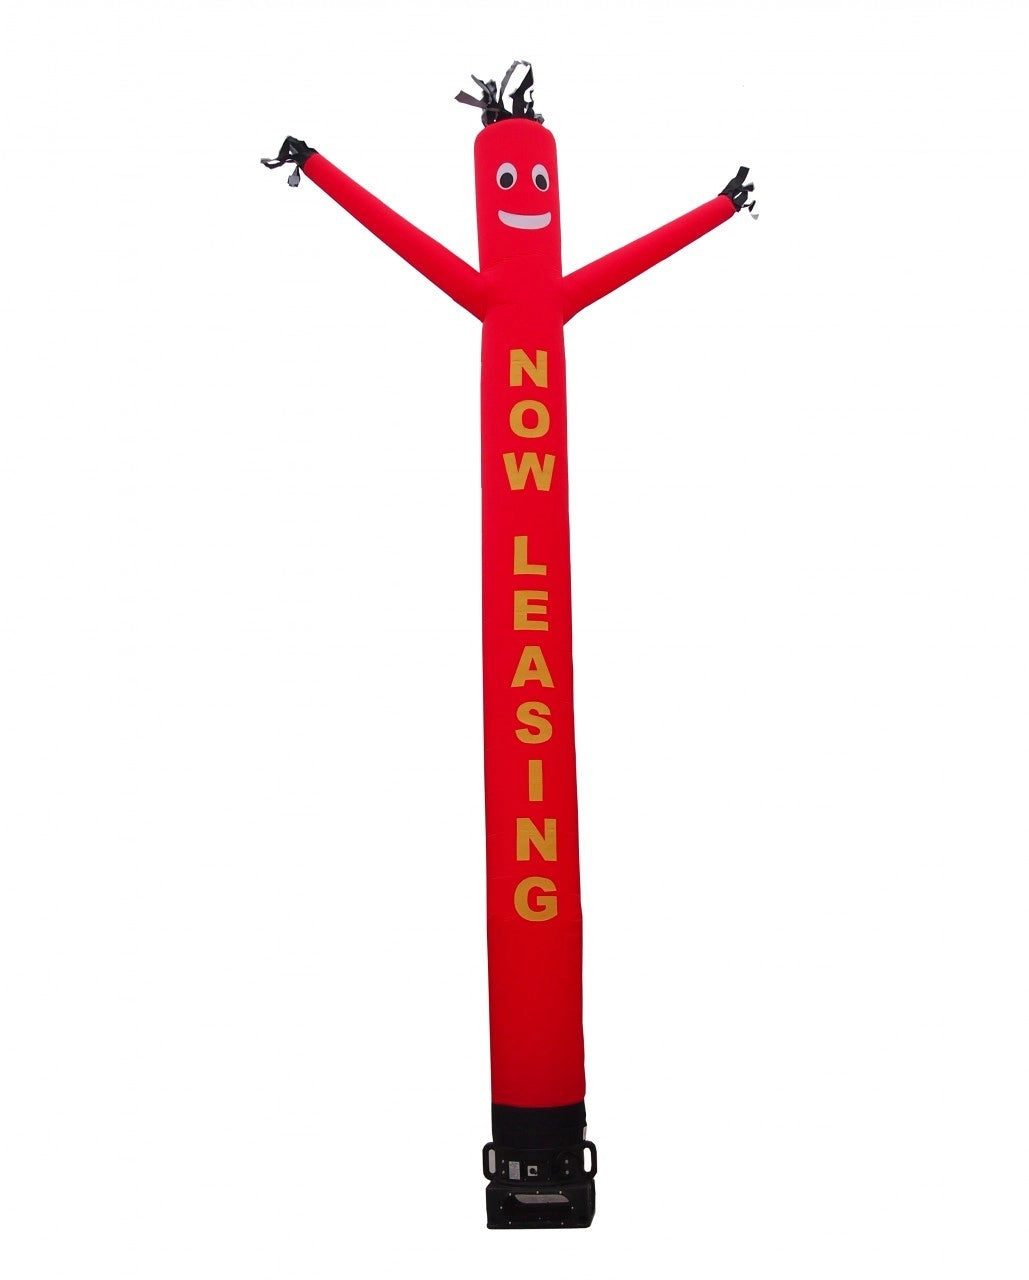 20ft Now Leasing in Yellow on Red Air Dancer Tube Man Wacky Wavy Inflatable